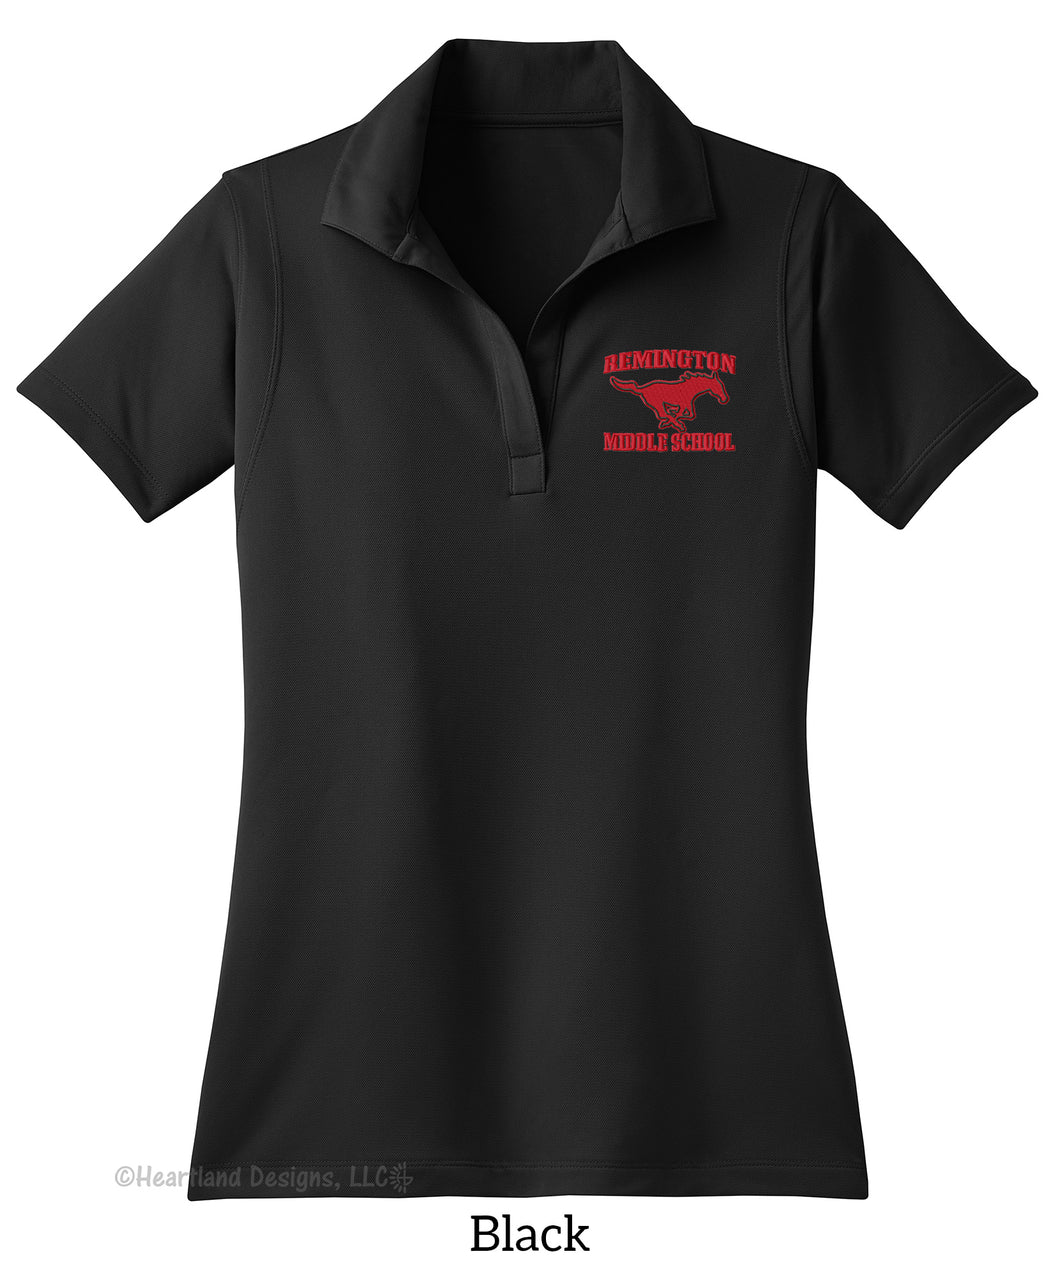 RMS Staff Women's Short Sleeve Polo with Embroidered Logo